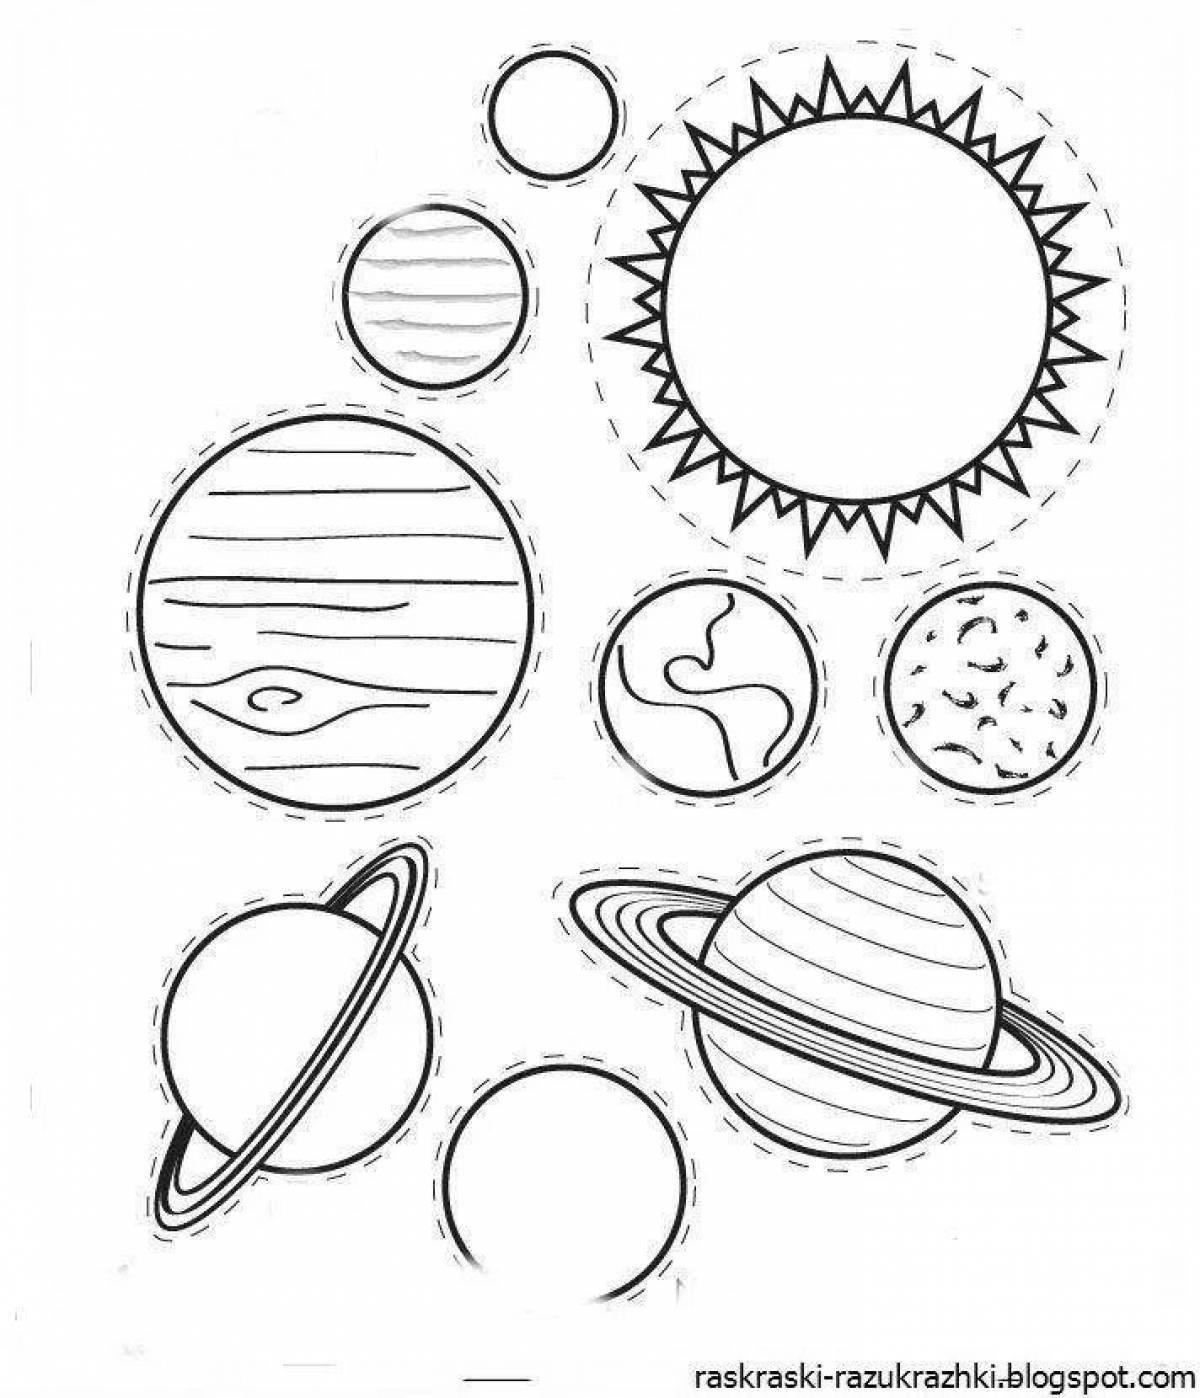 Great solar system coloring book